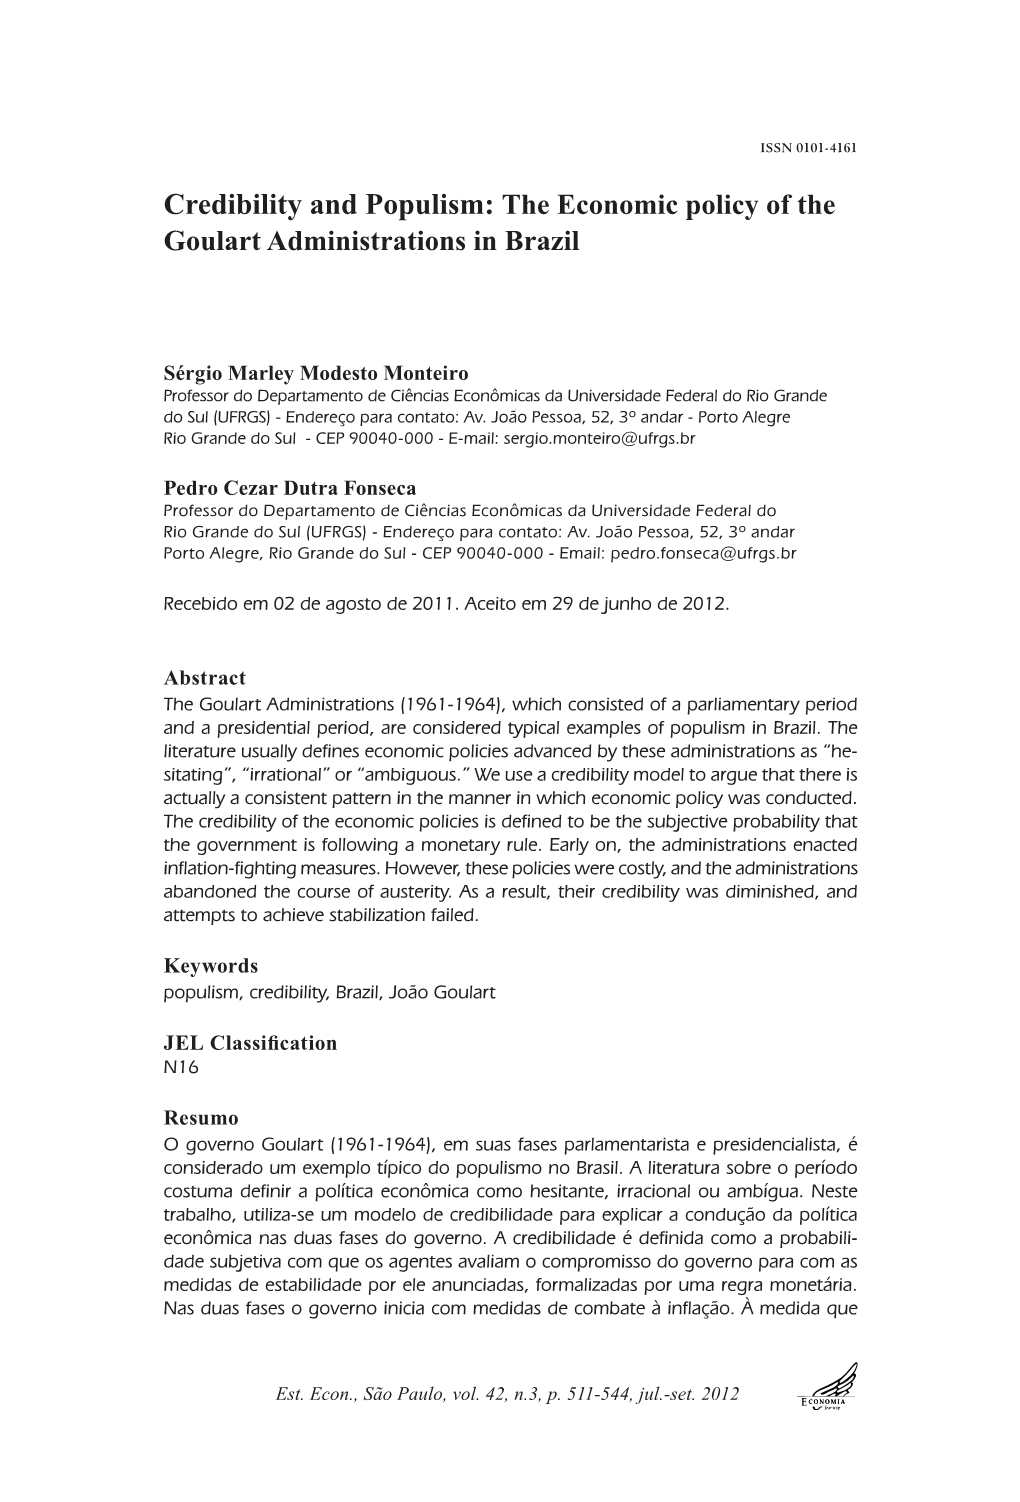 Credibility and Populism: the Economic Policy of the Goulart Administrations in Brazil